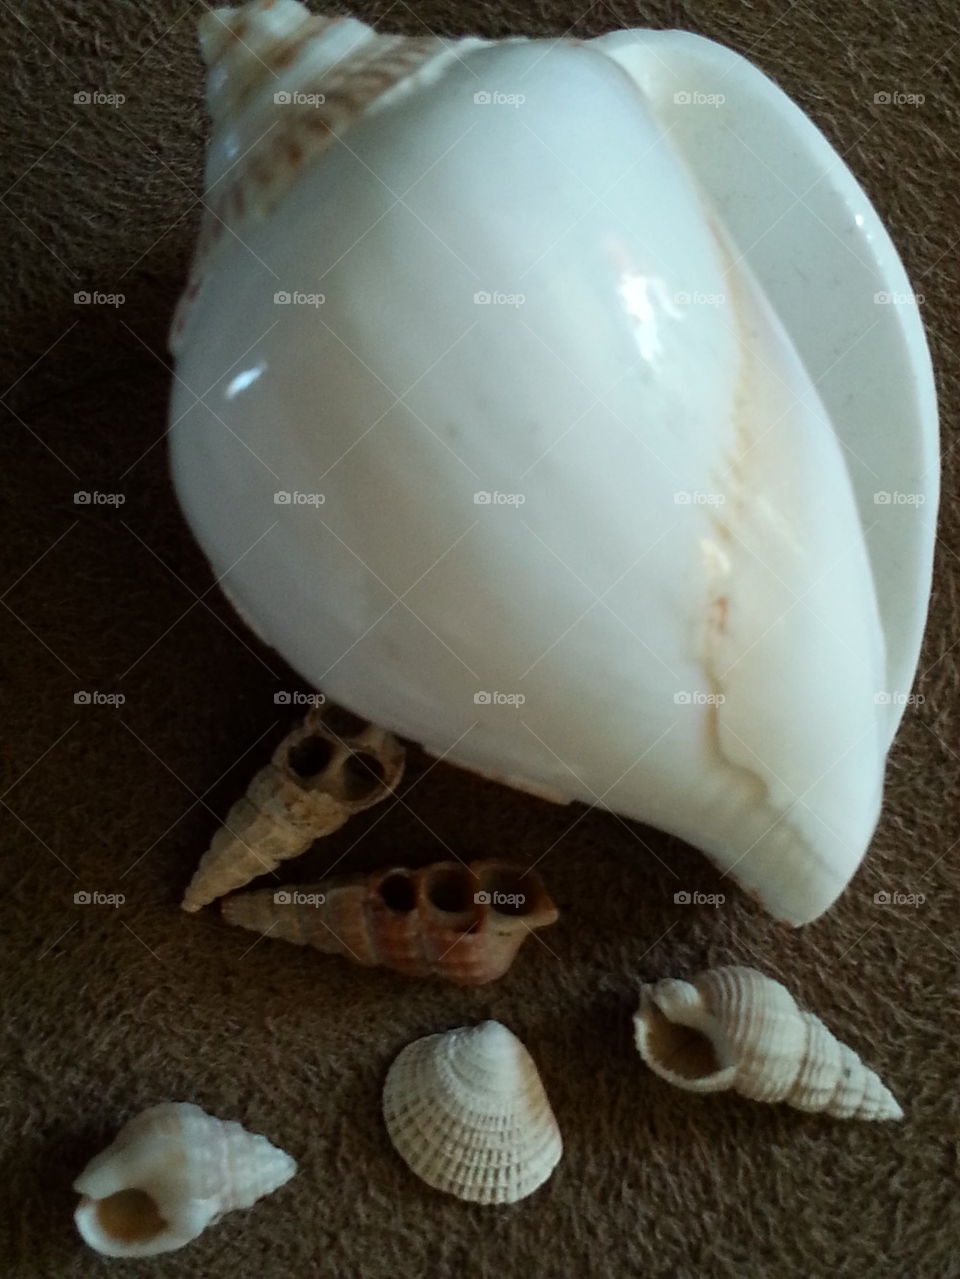 Shells of different shapes!